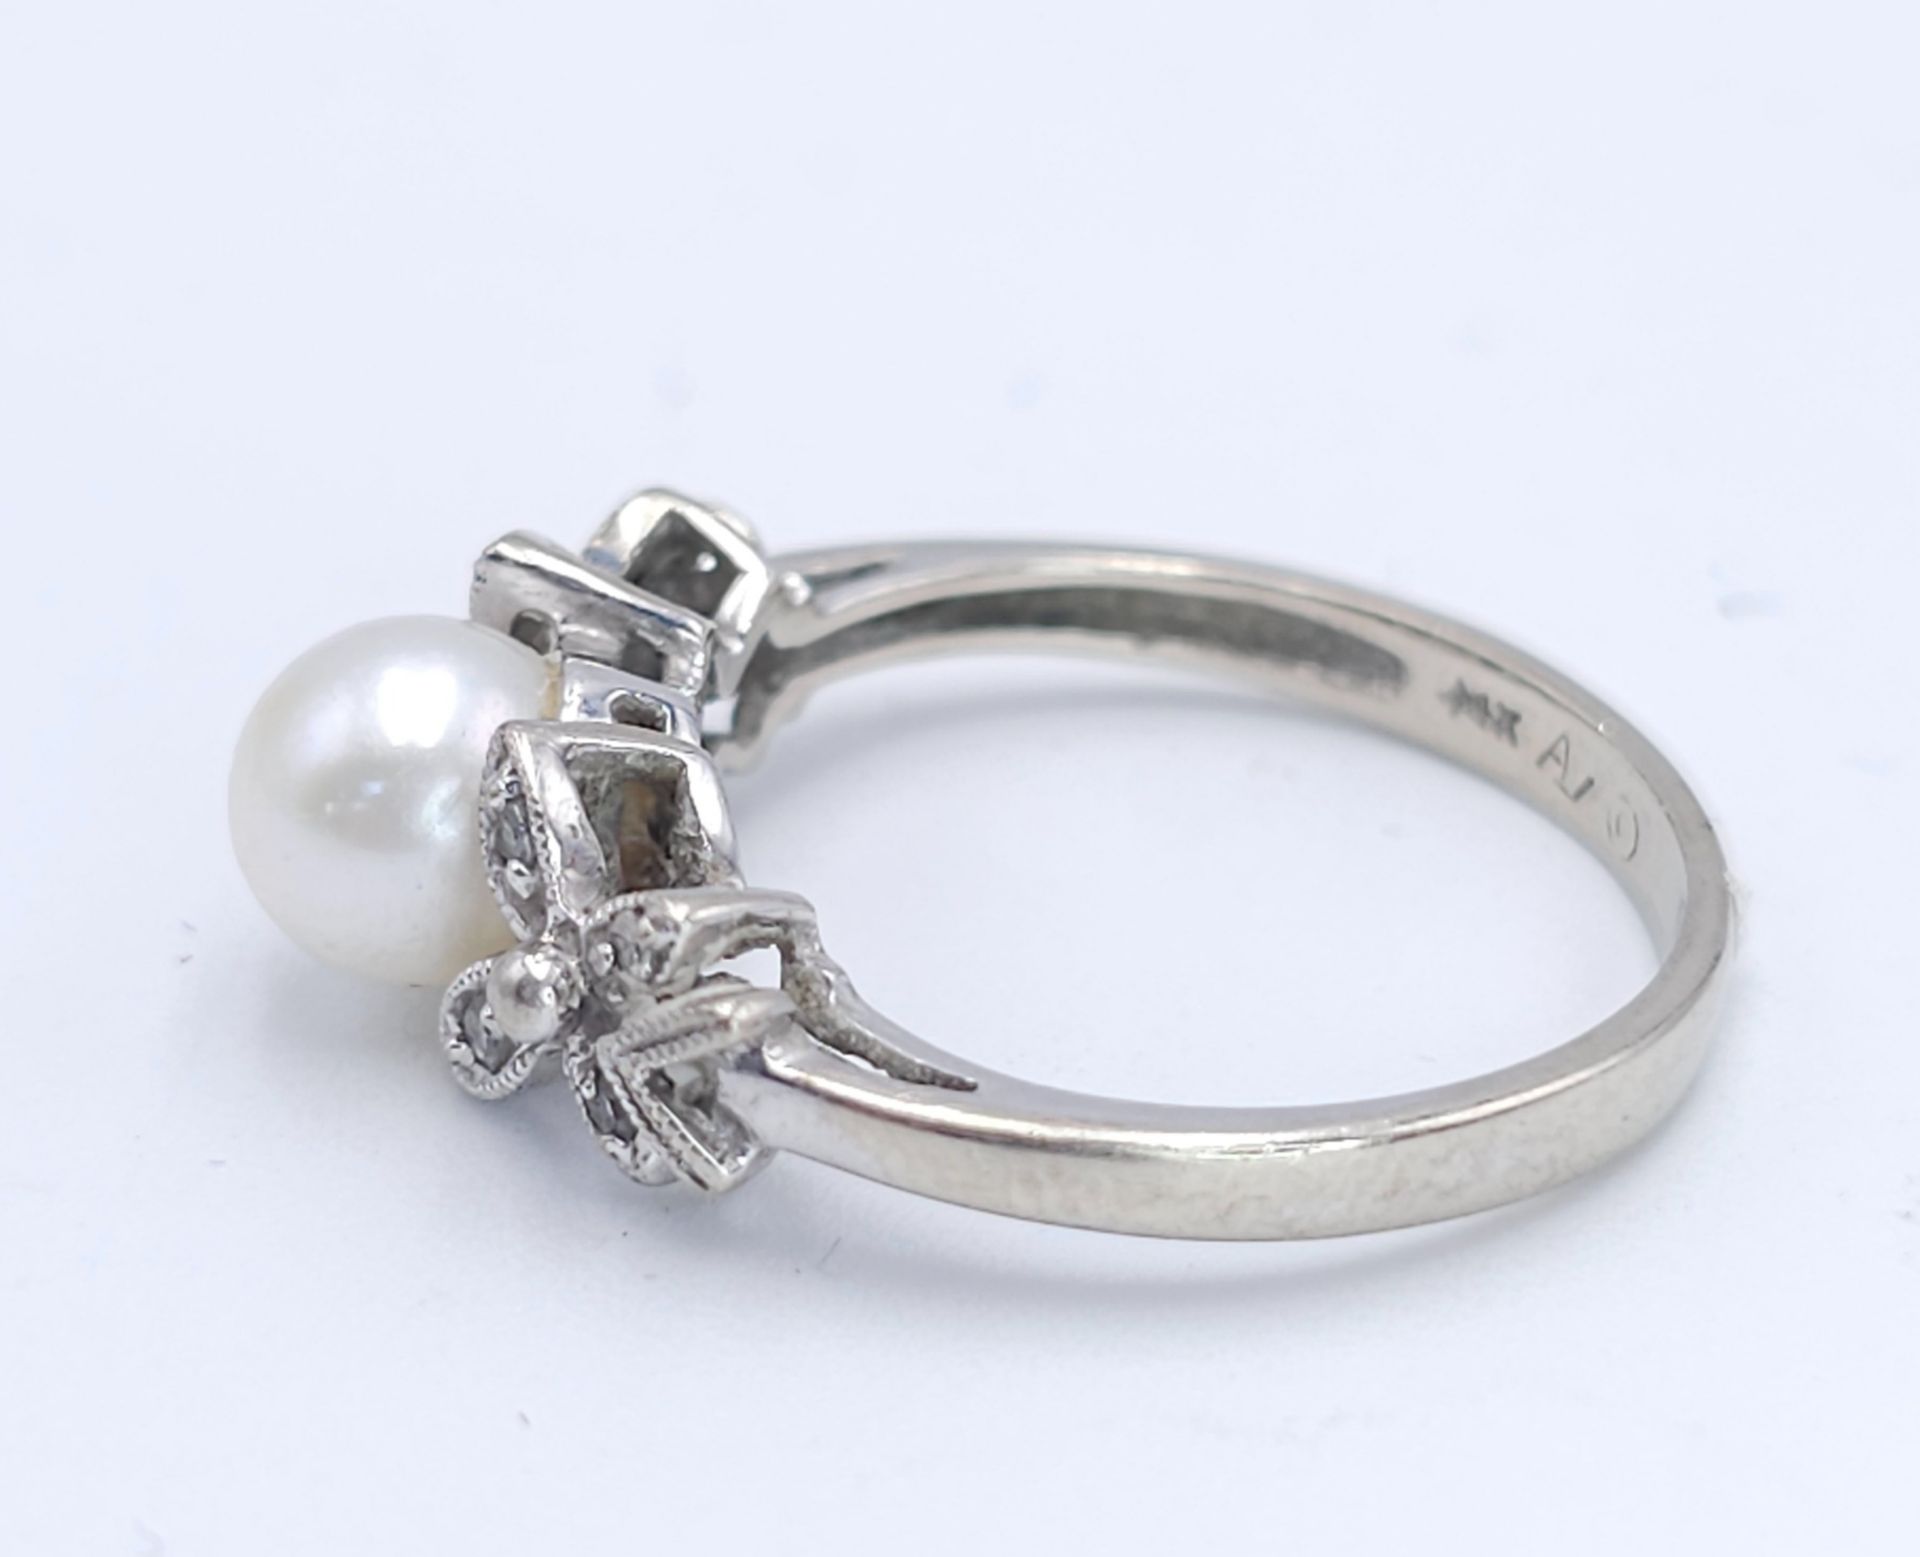 A 14K White Gold, Pearl and Diamond Ring. Central pearl with diamond accents. Size L 1/2. 2.5g total - Image 3 of 6